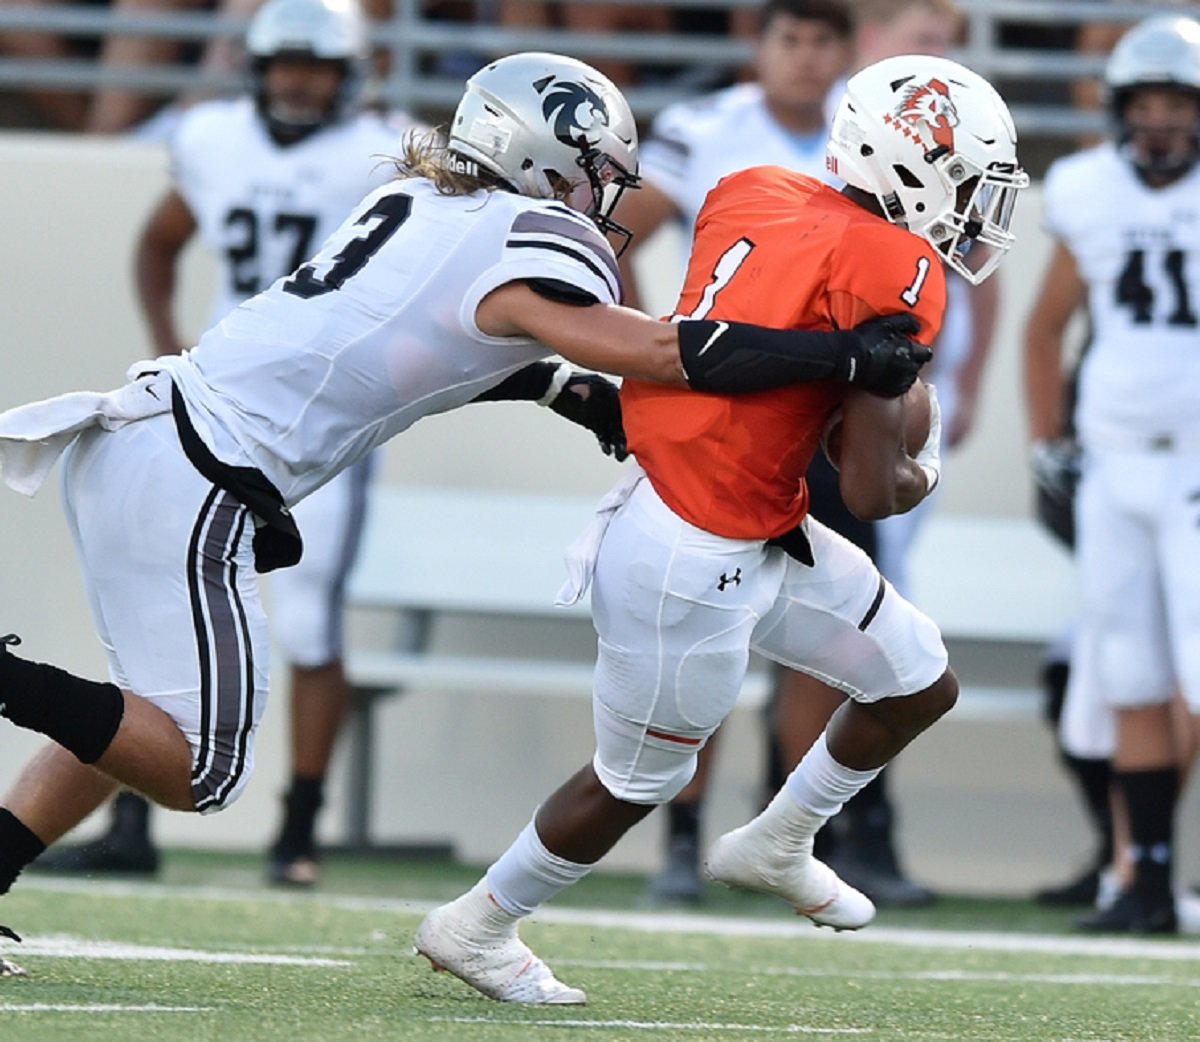 Aledo sophomore wide receiver Jo Jo Earle (1) catches one of his game-high eight passes Friday night during the Bearcats' 40-0 win over Denton Guyer Friday night at Collins Stadium. Earle caught a pair of touchdown passes (33, 25 yards) from quarterback Jake Bishop. Photo by Jeff Woo